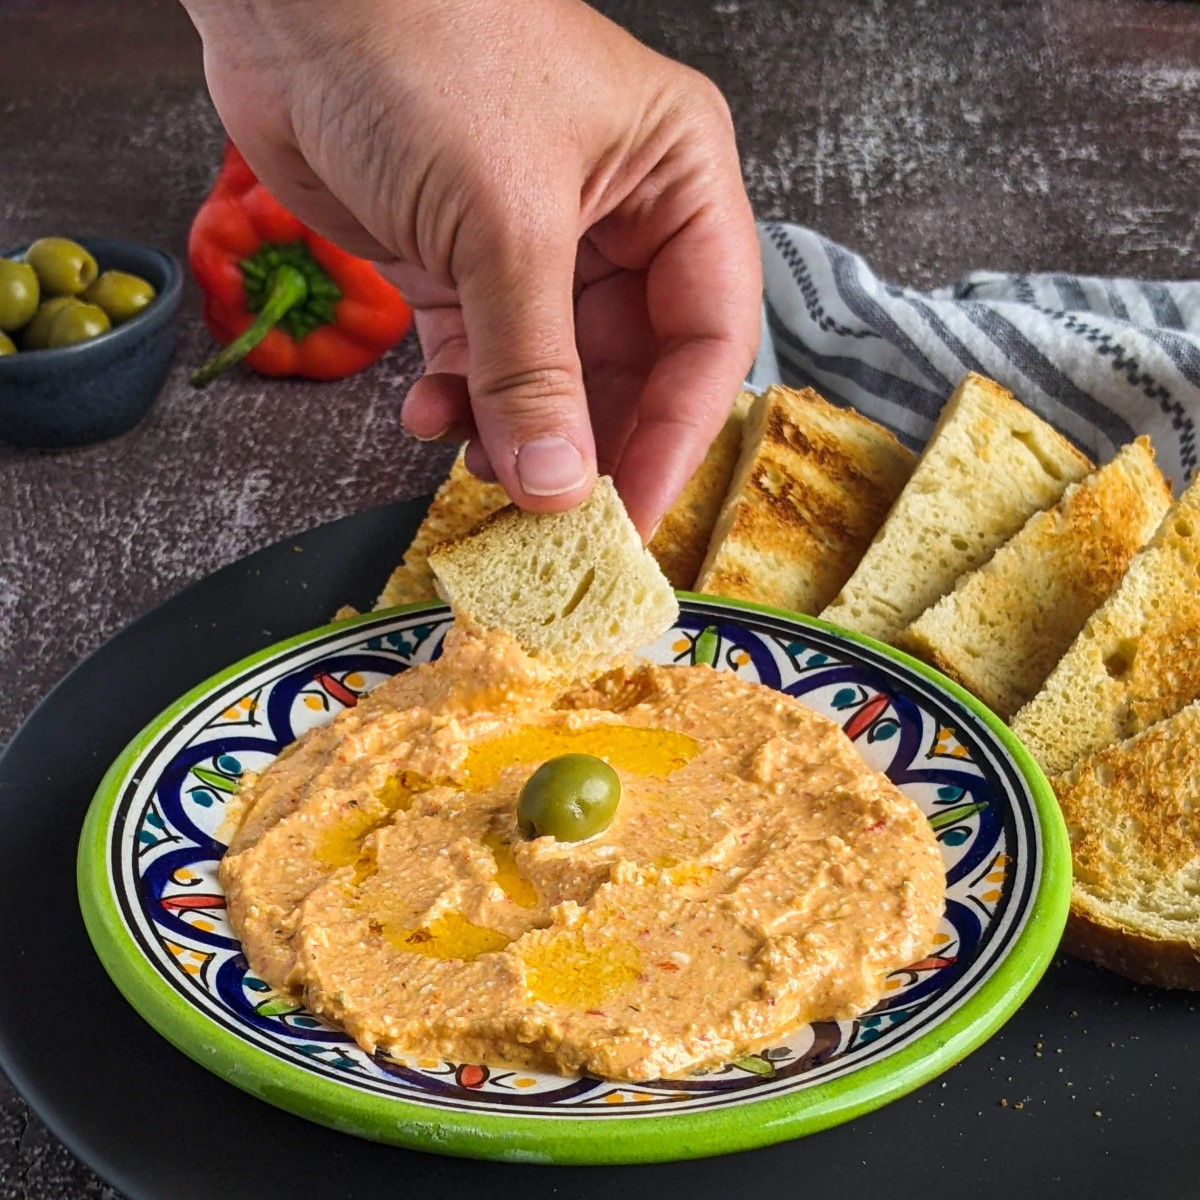 Greek spicy feta cheese dip served on a plate with an olive on top and next to slices of bread.